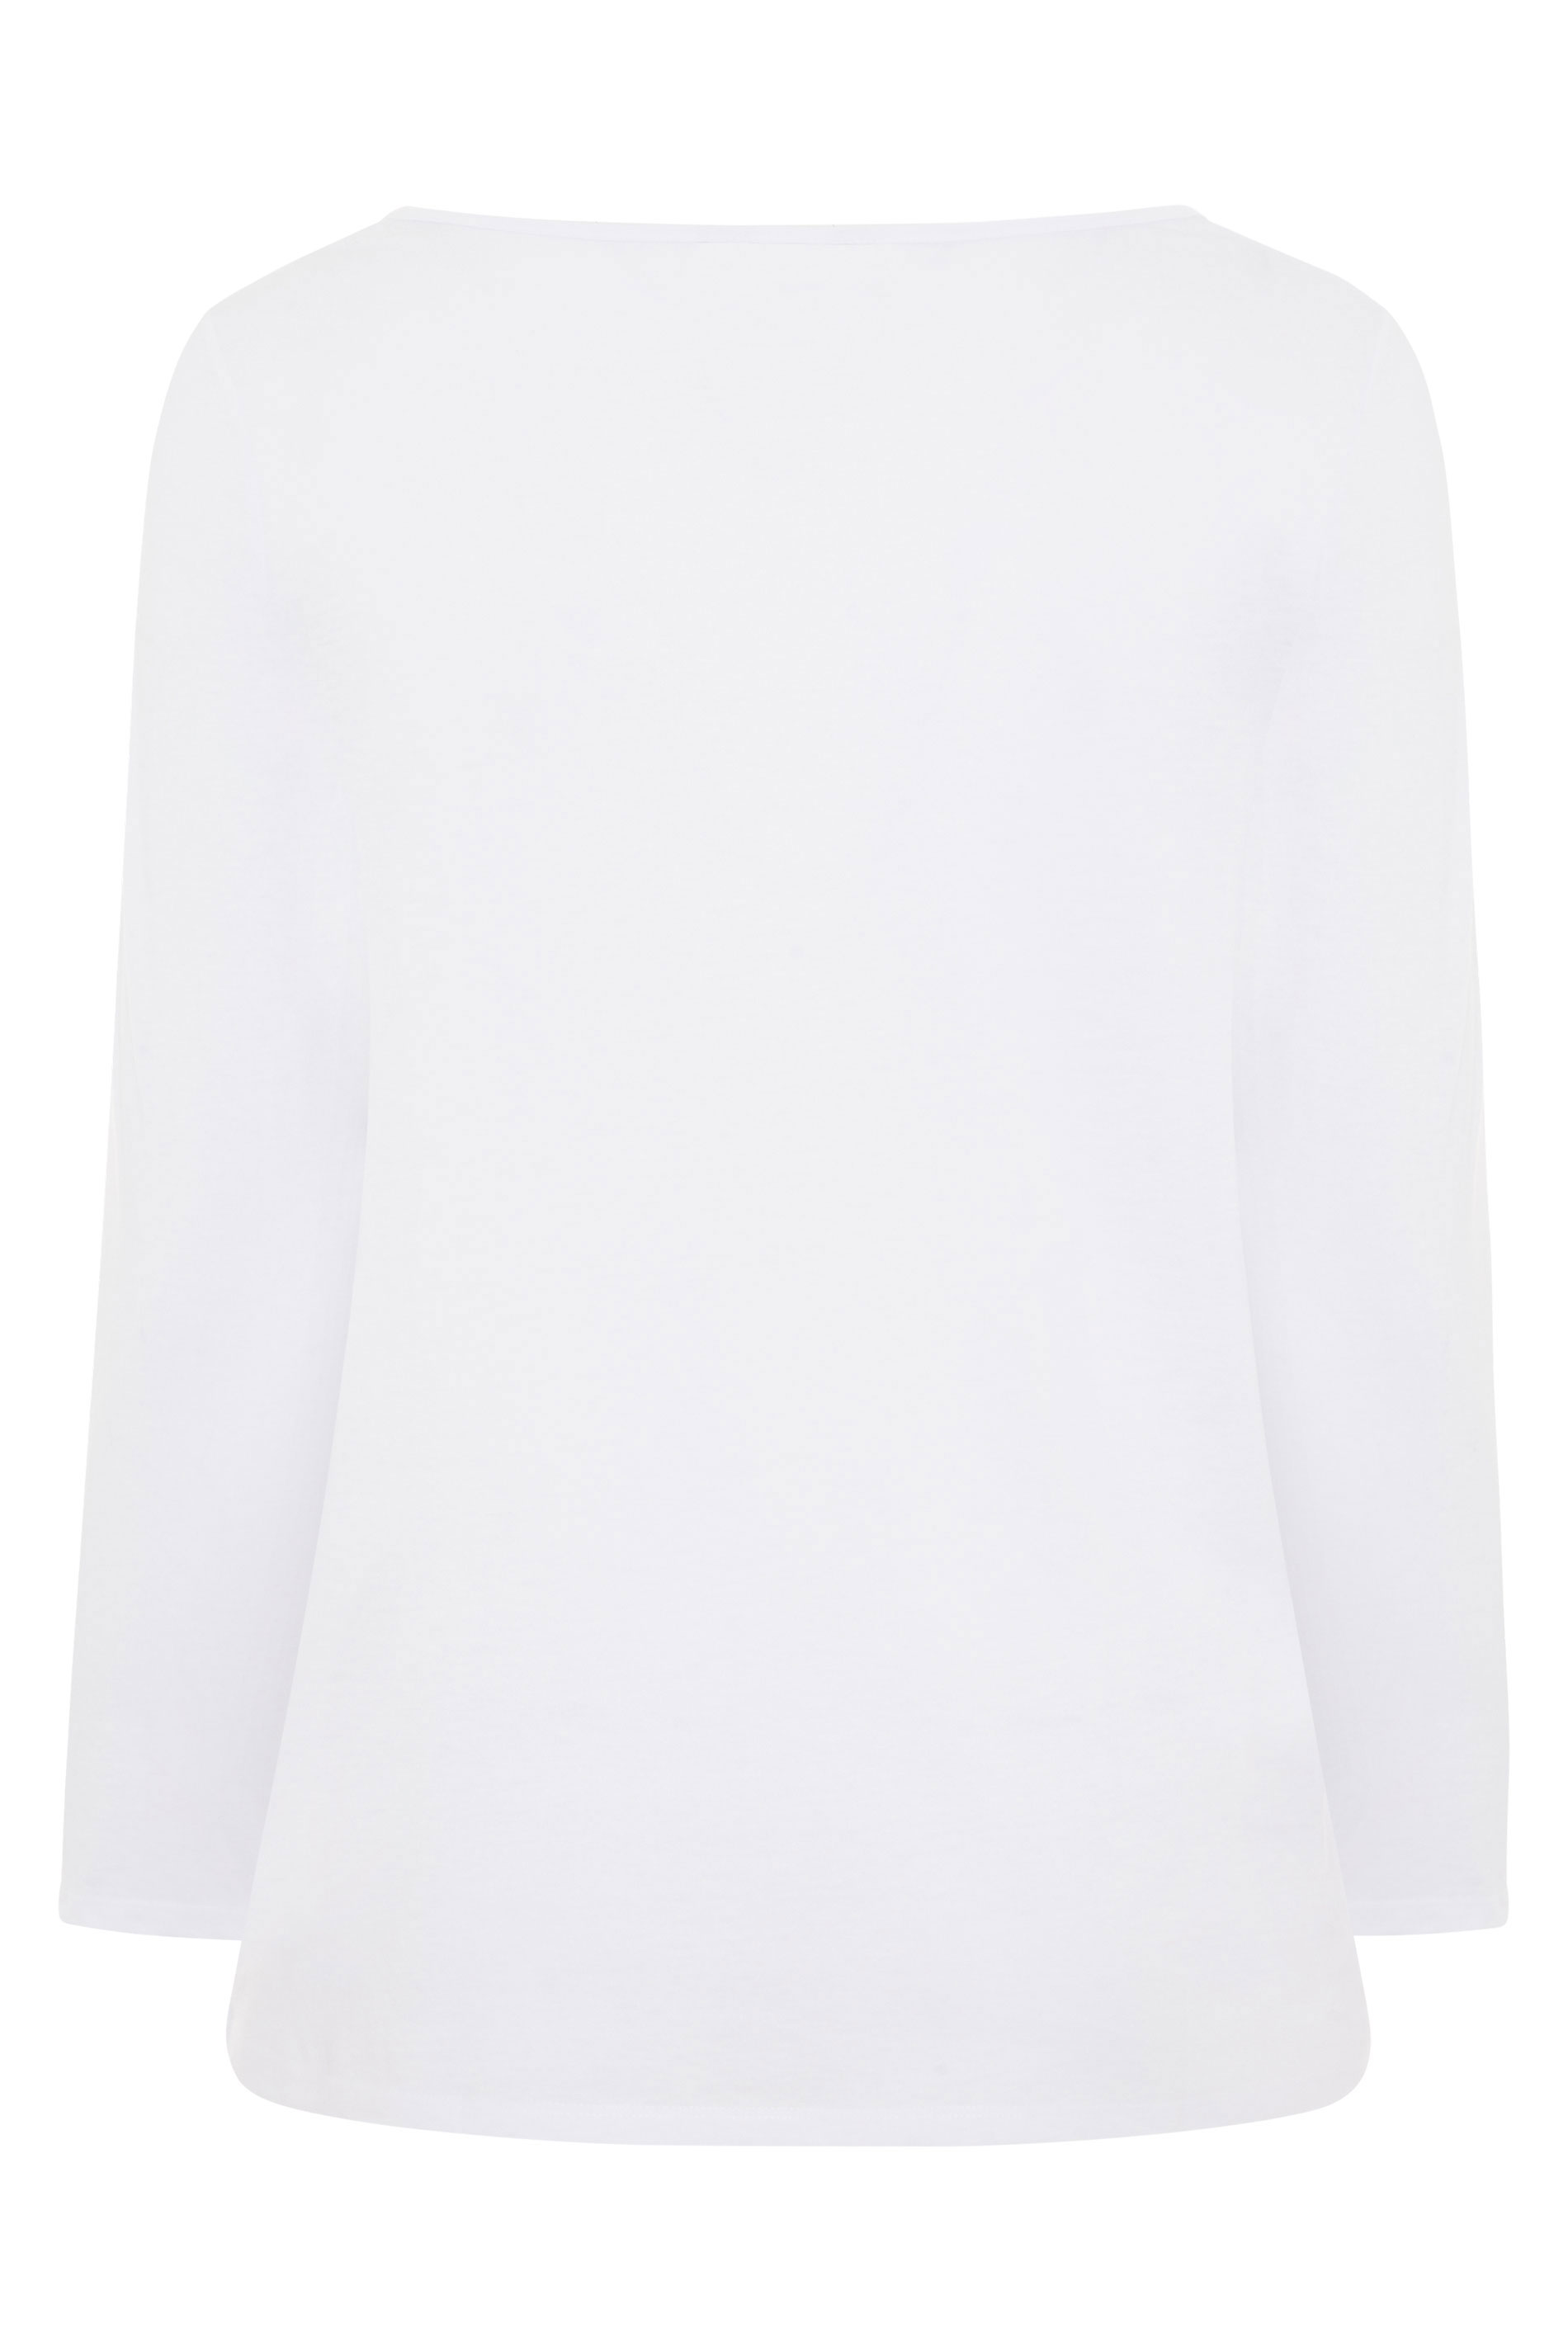 Grande taille  Tops Grande taille  Tops à Manches Longues | T-Shirt Blanc Manches Longues en Jersey - FZ03379